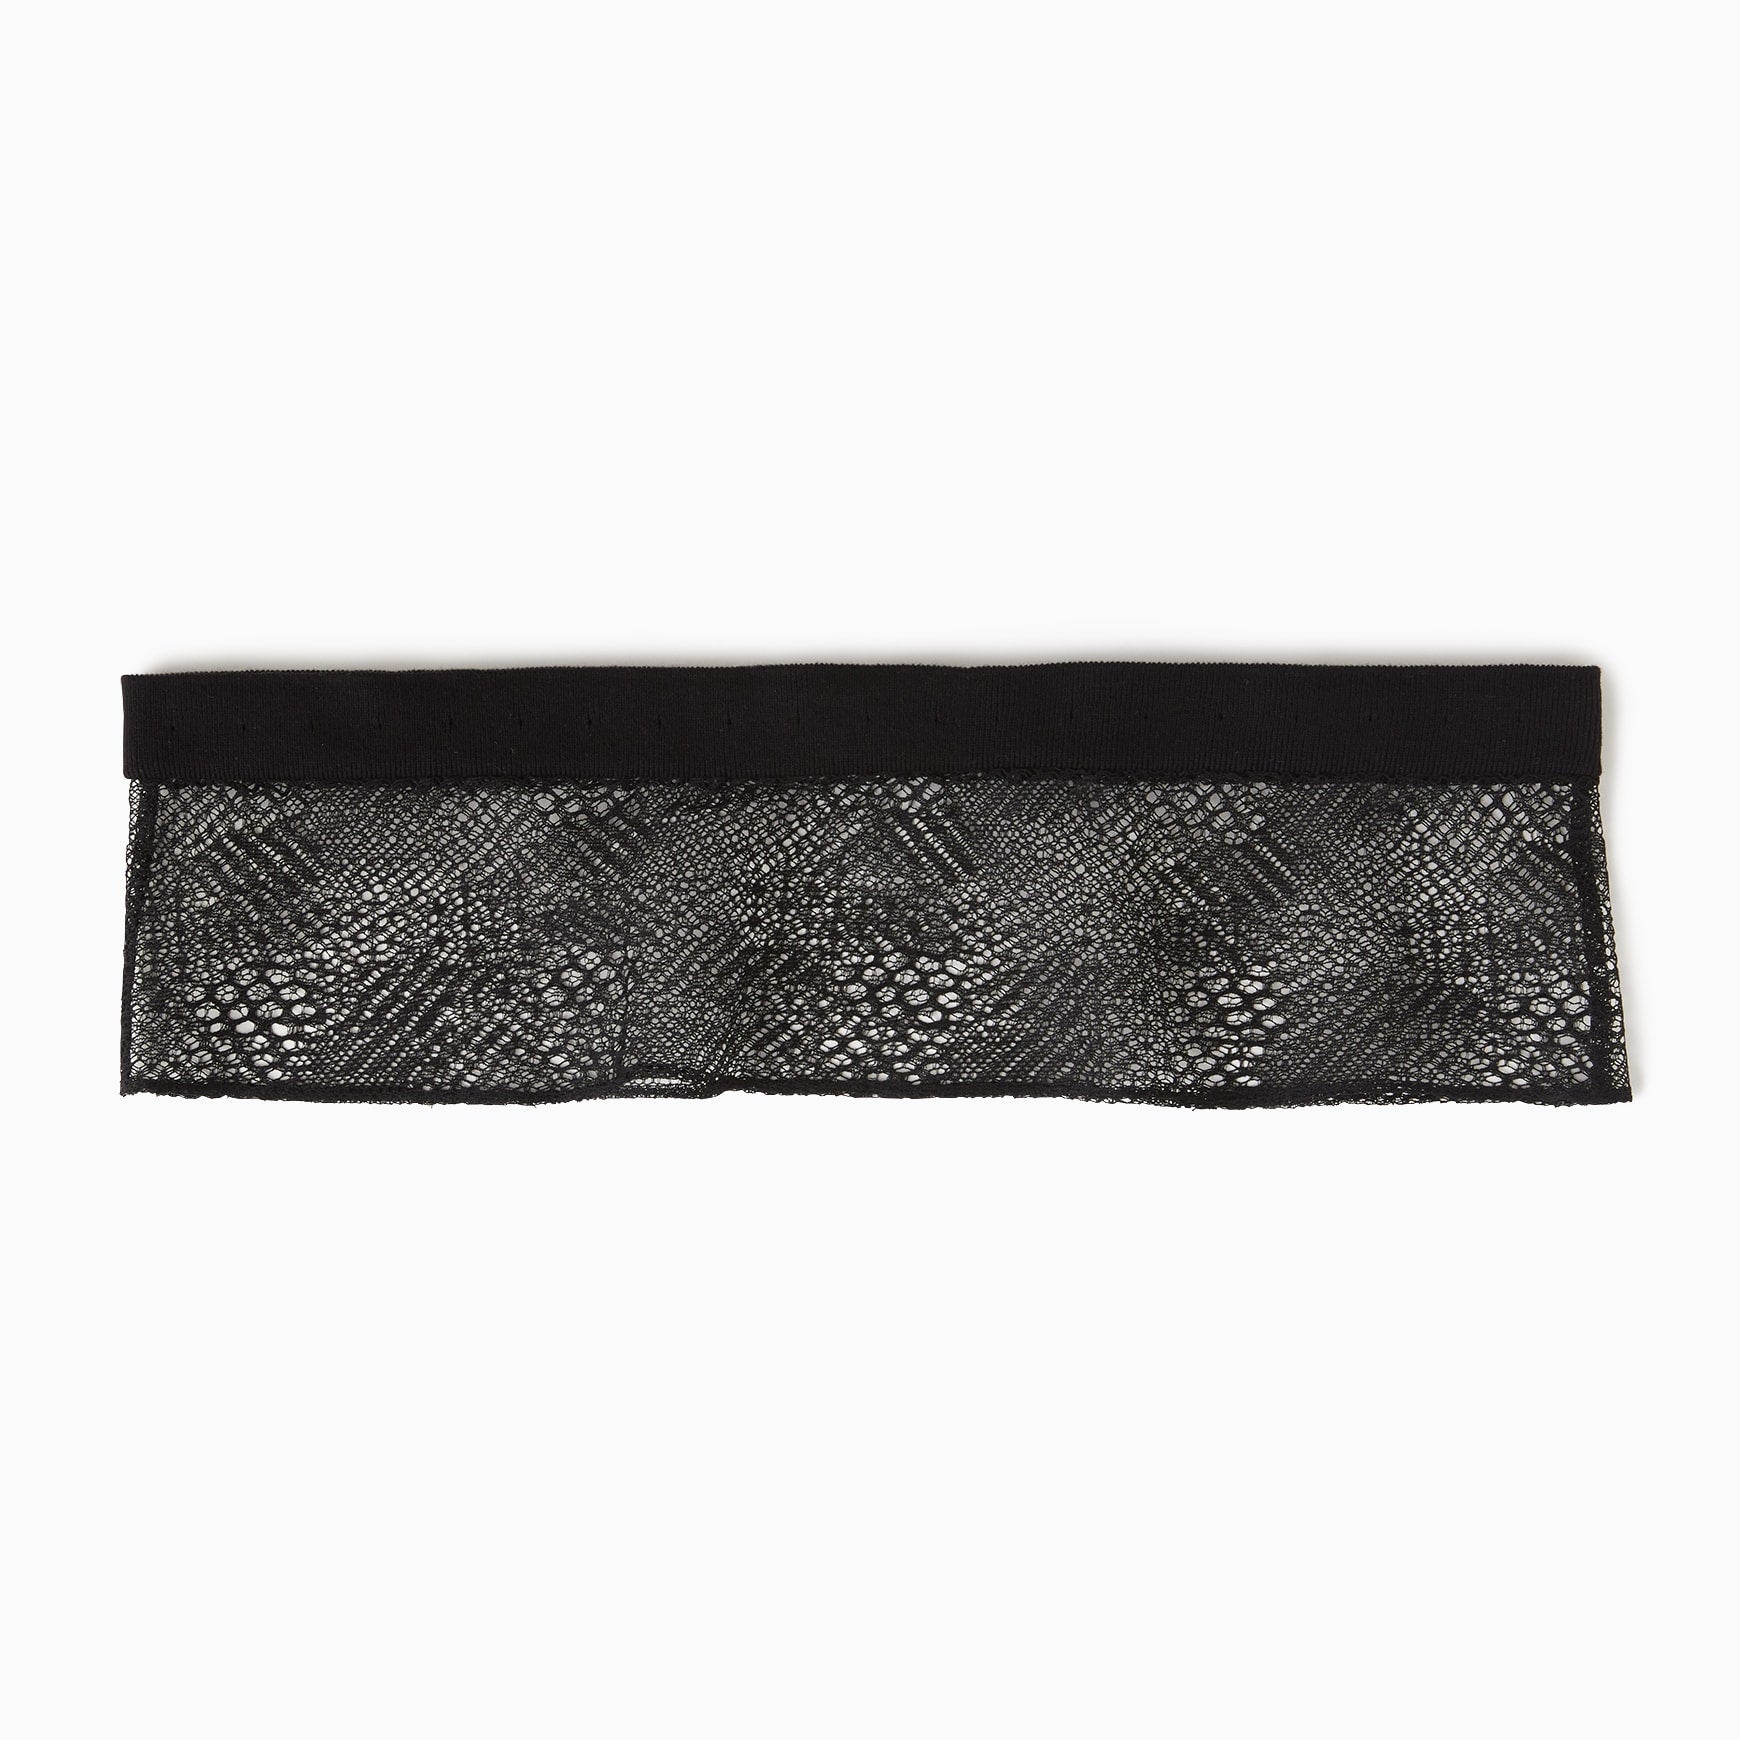 TYPE-1 Knit French Lace Waist Part (Black Cells)